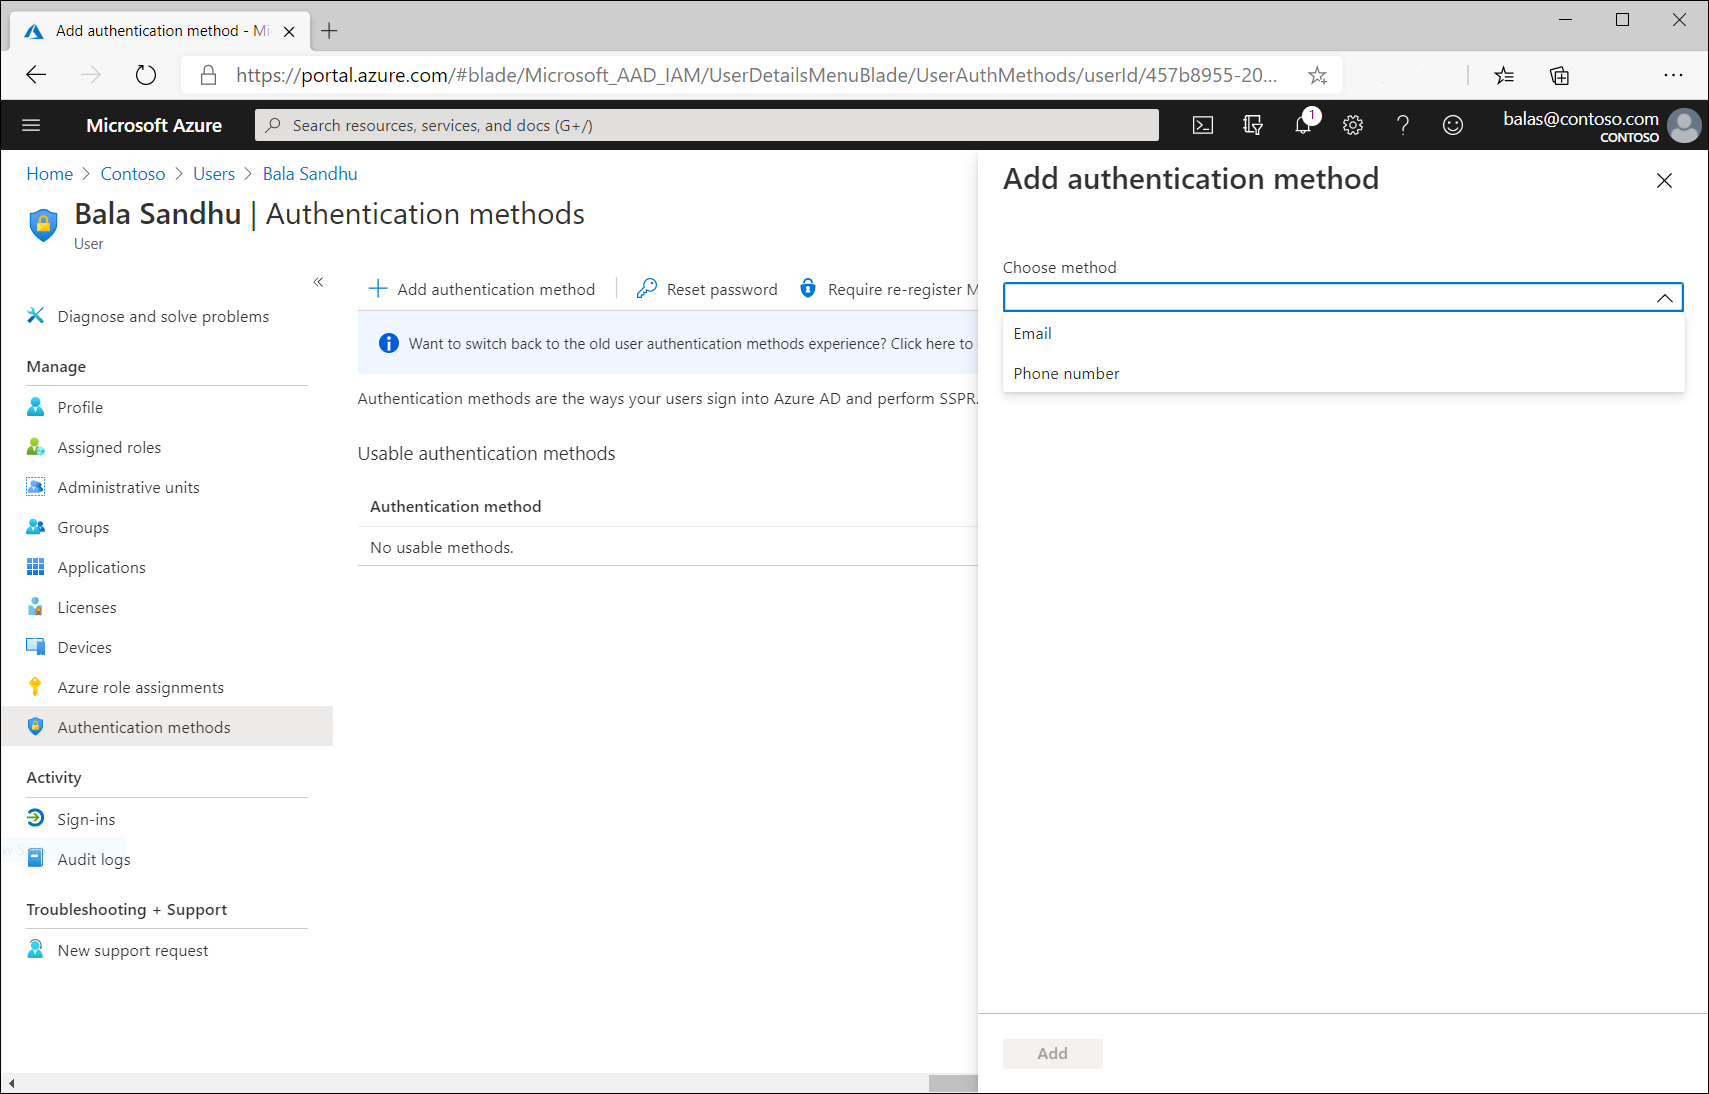 Add authentication methods from the Azure portal